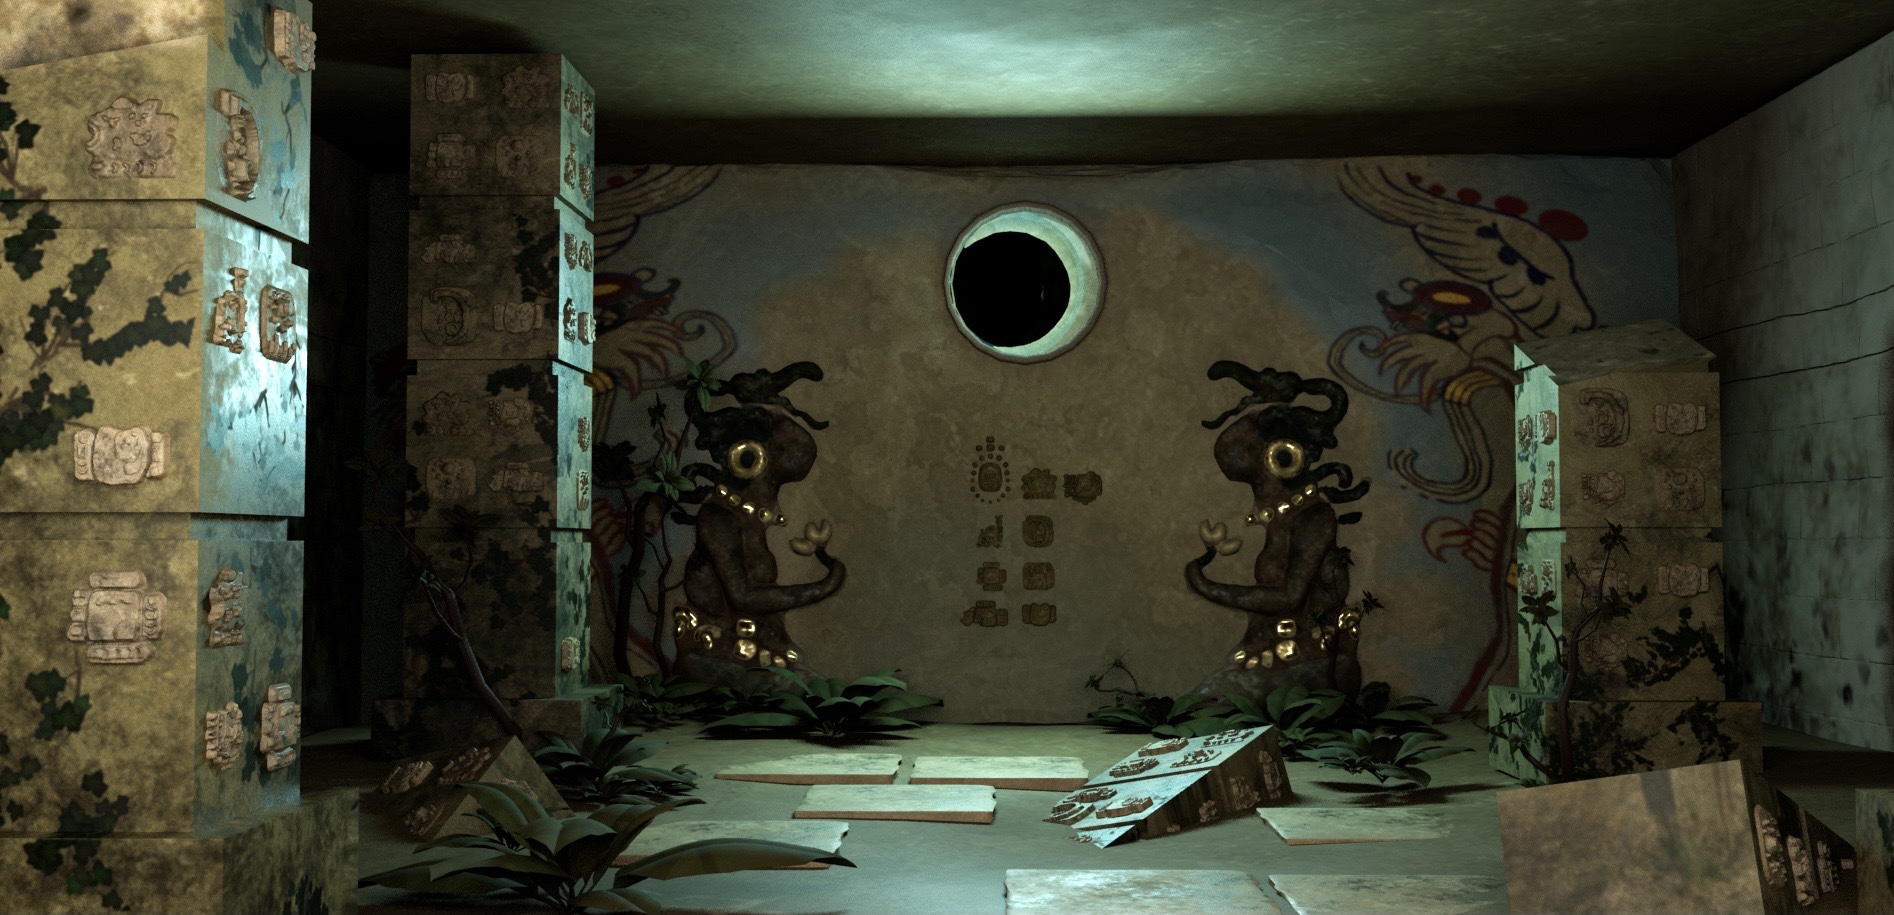 BA Animation work by Isabelle Thompson showing a temple depicting the Mayan Goddess Ix Chel